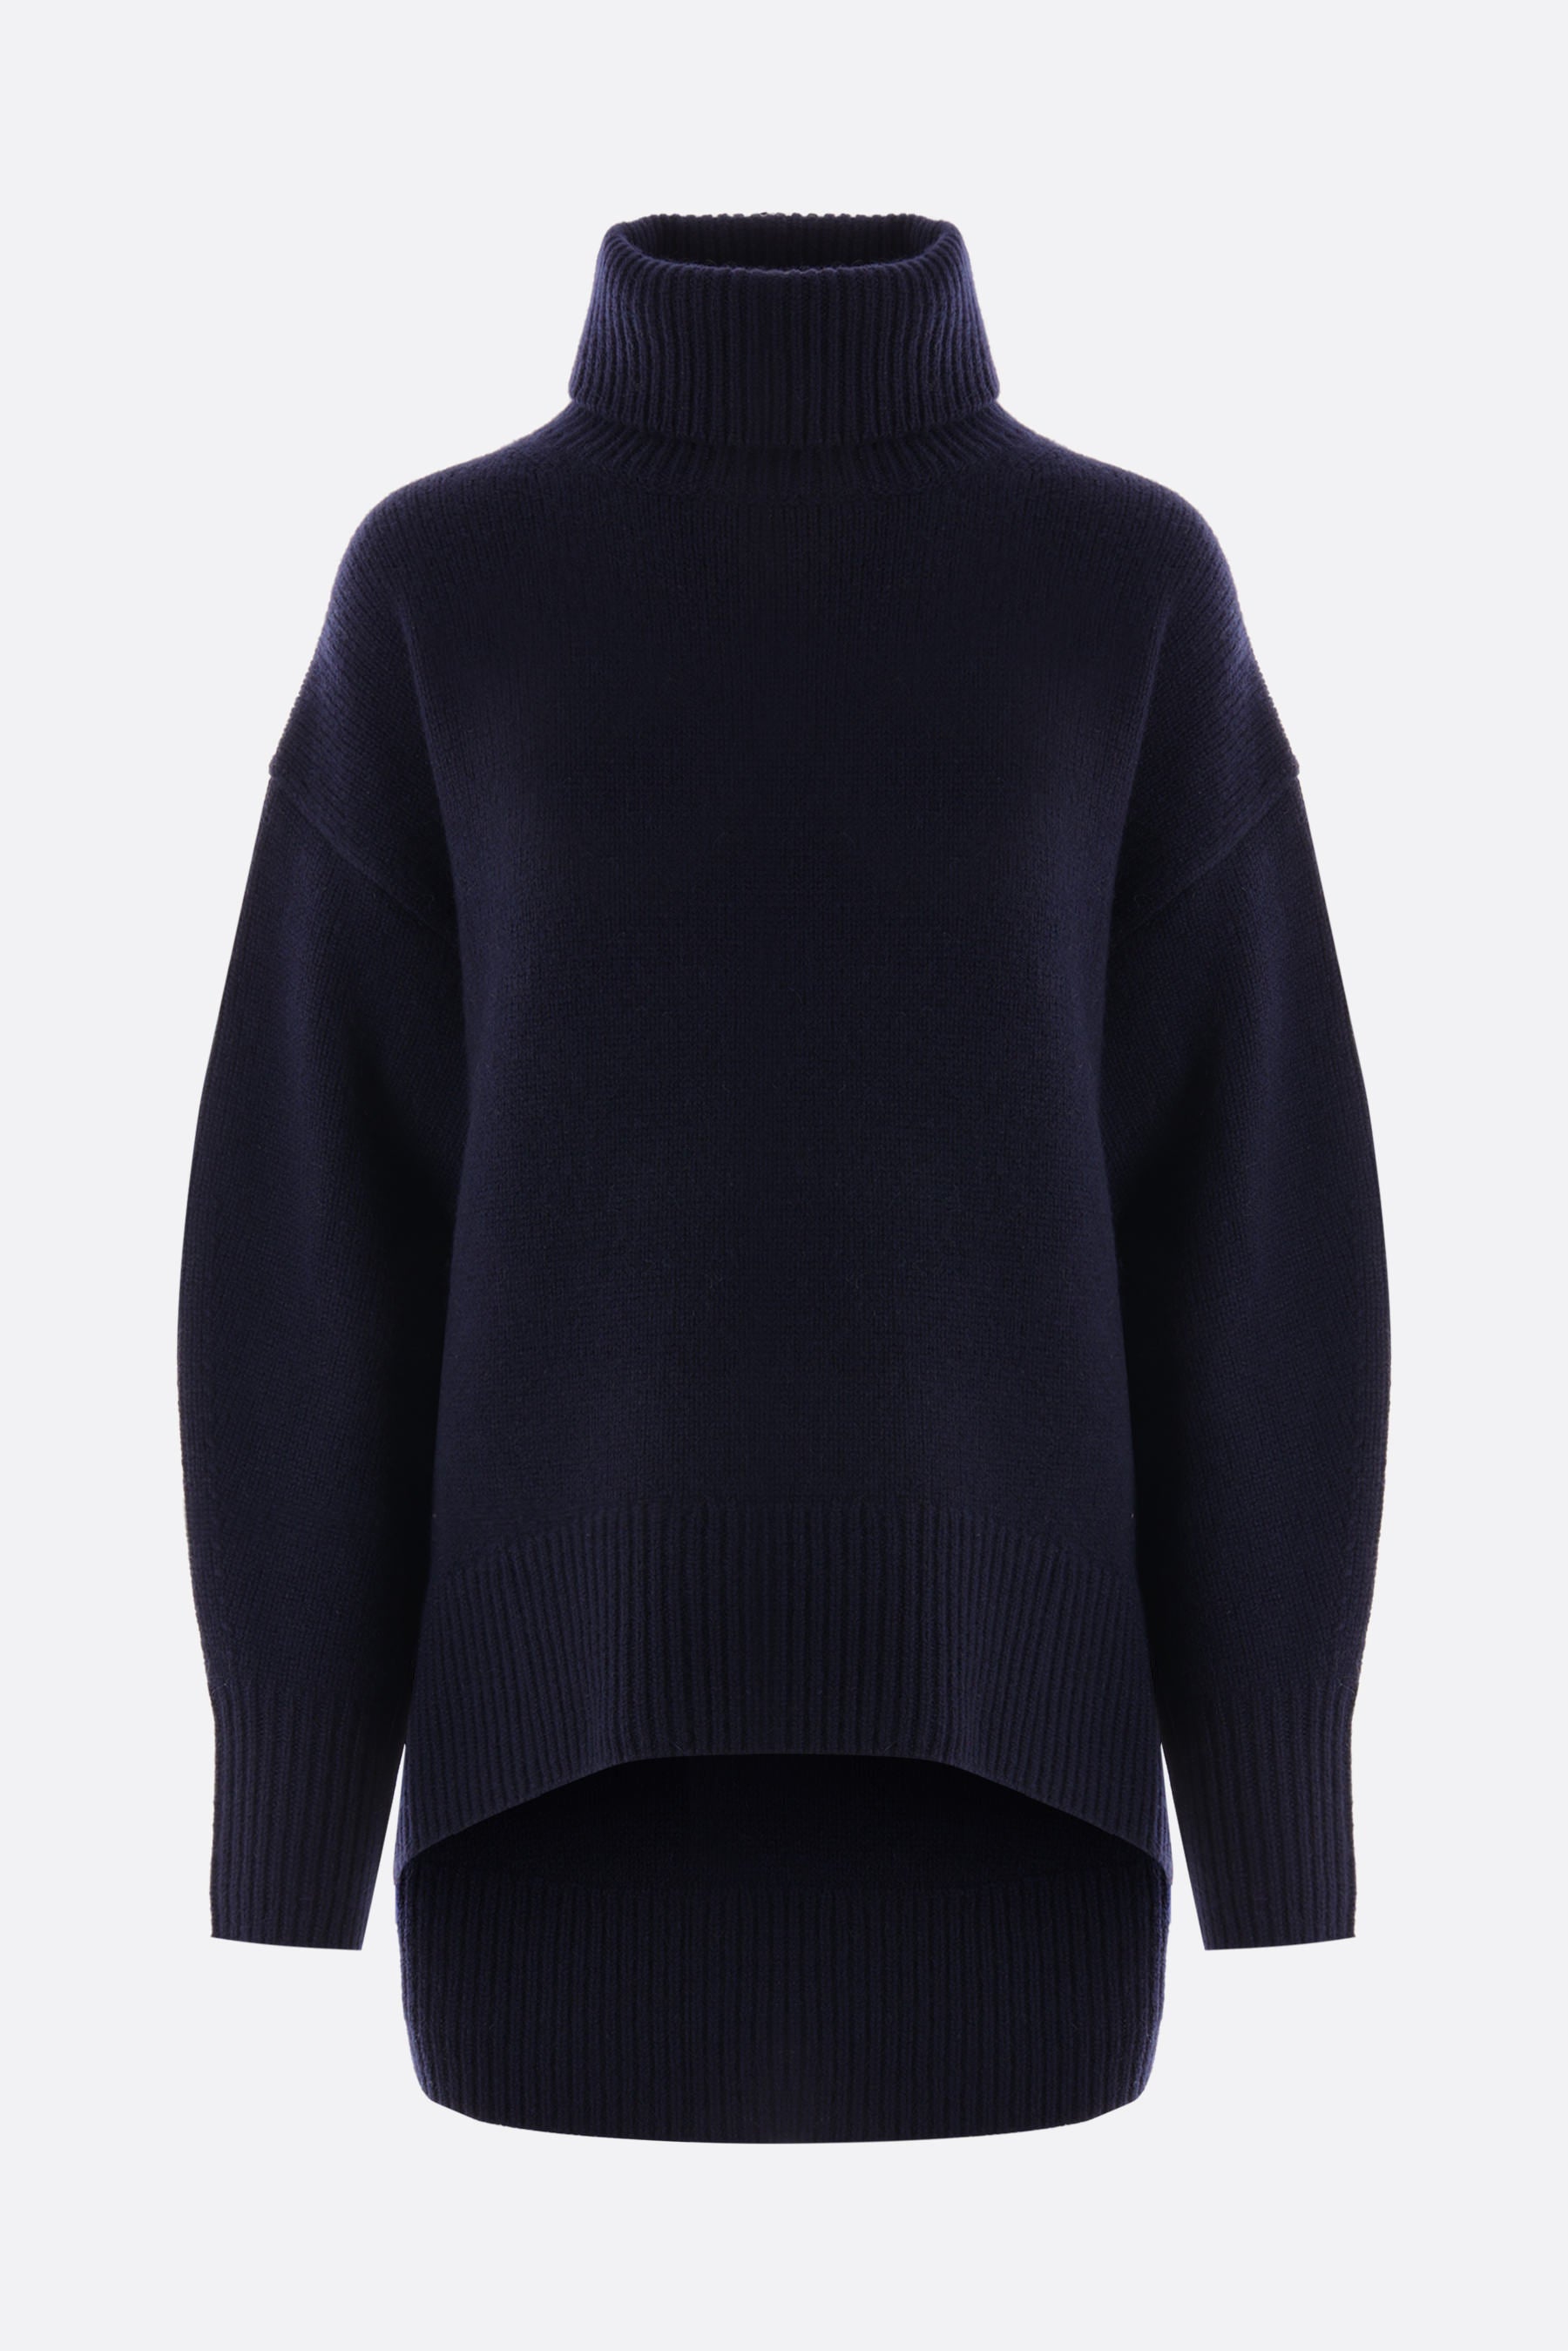 World's End cashmere oversized pullover